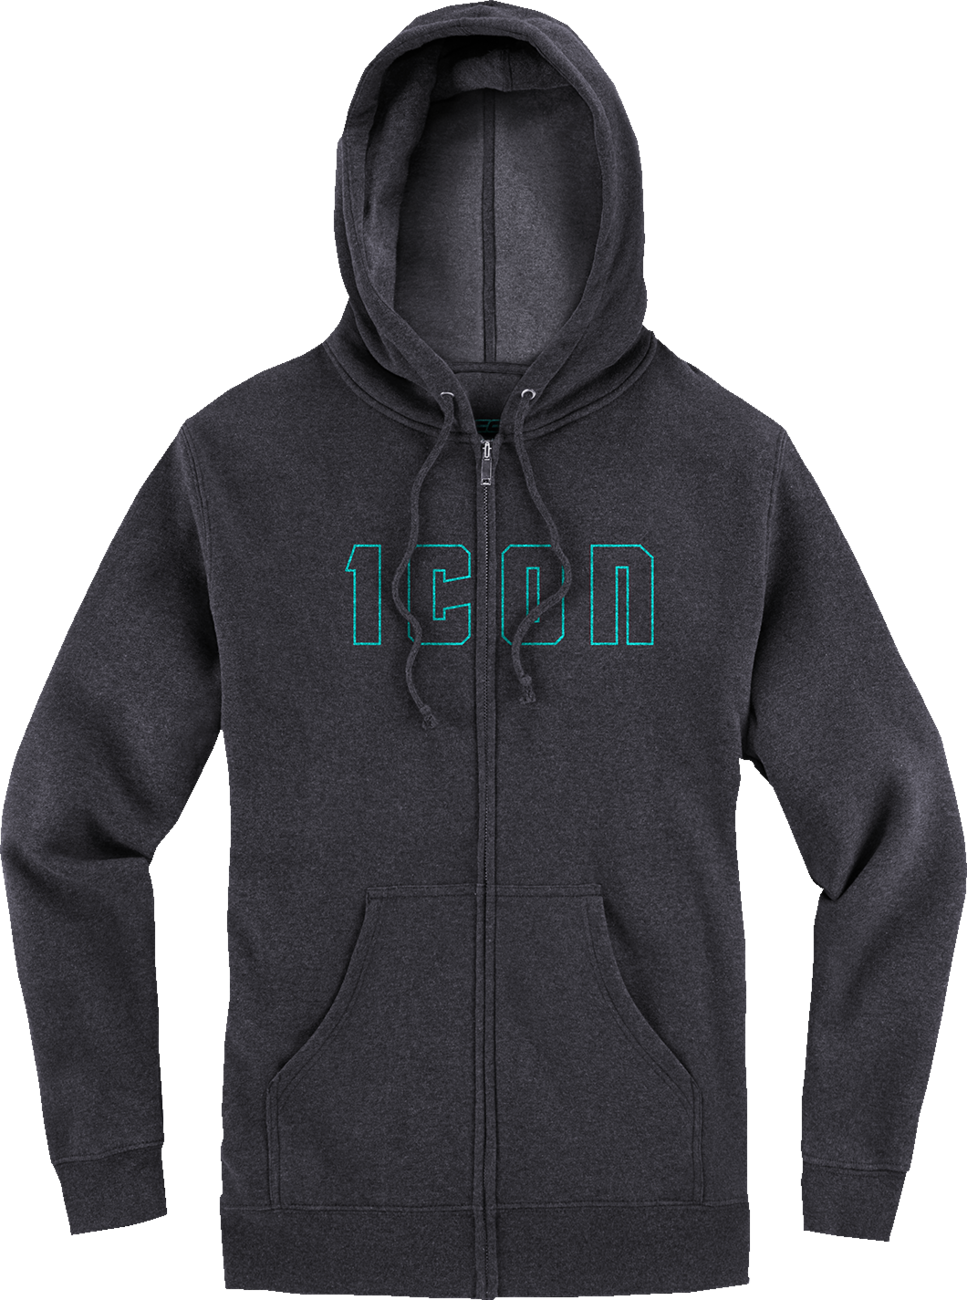 ICON Women's Kat Stevens™ Hoodie - Charcoal - Small 3051-1210